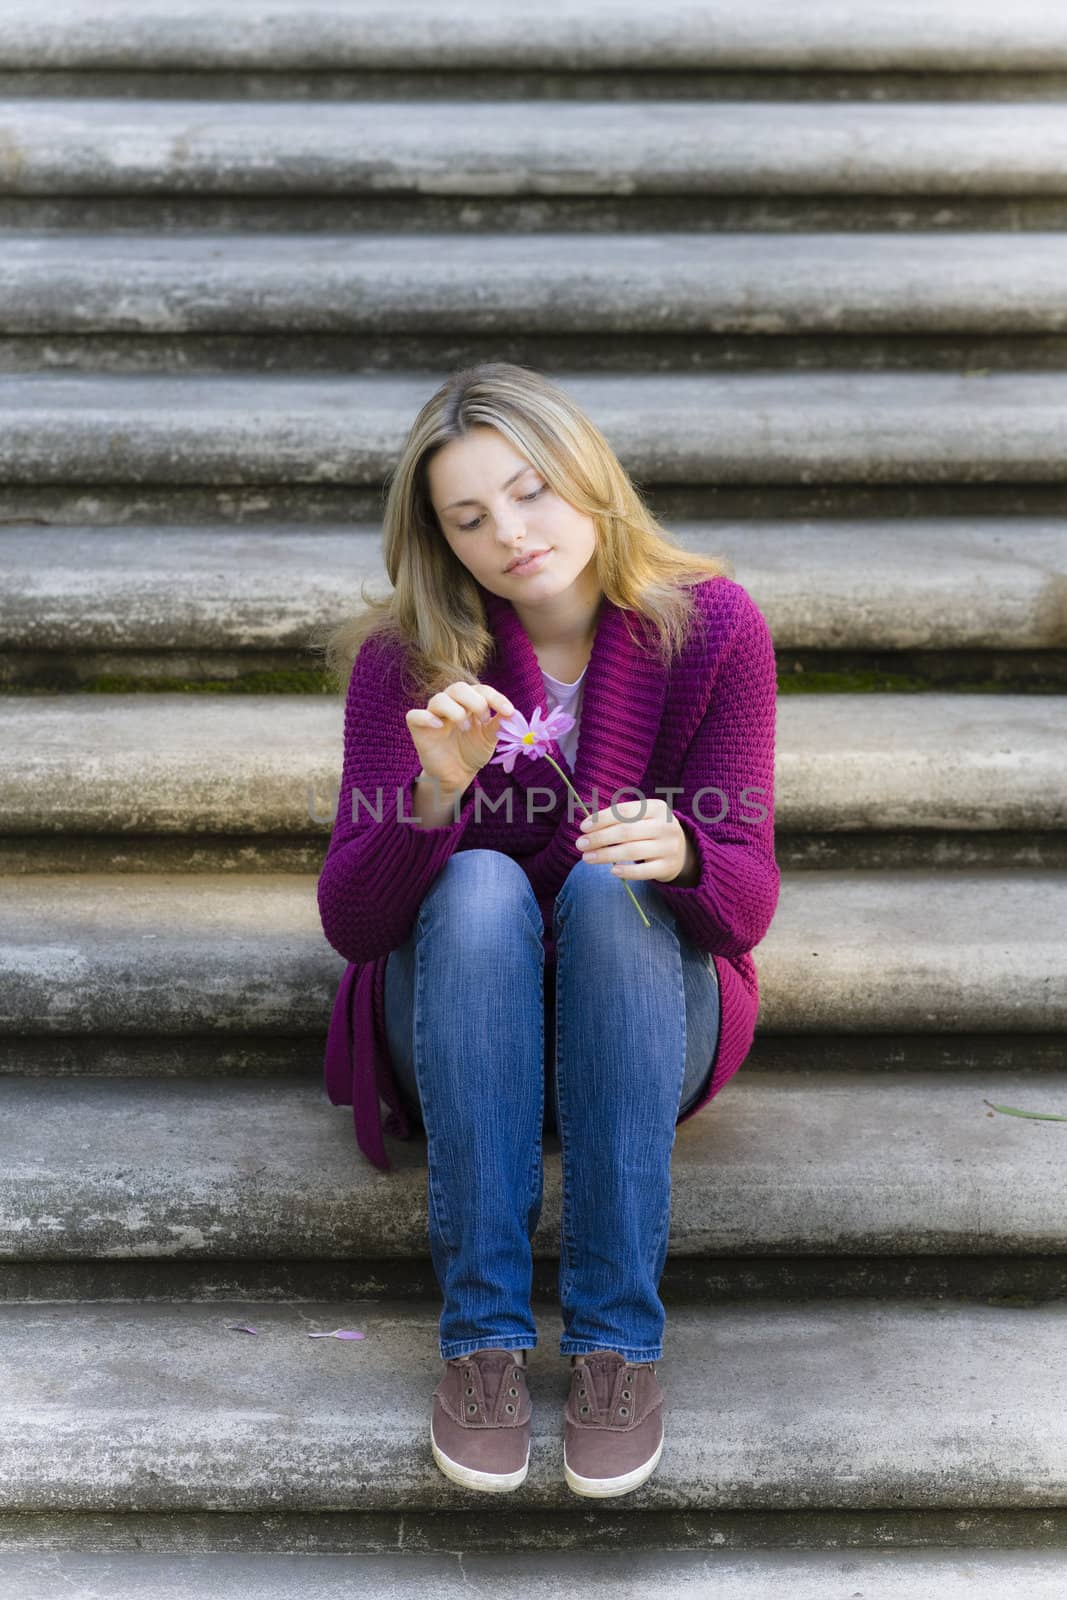 Pretty Blond Teen Girl Sitting on Stairs Holding a Daisy